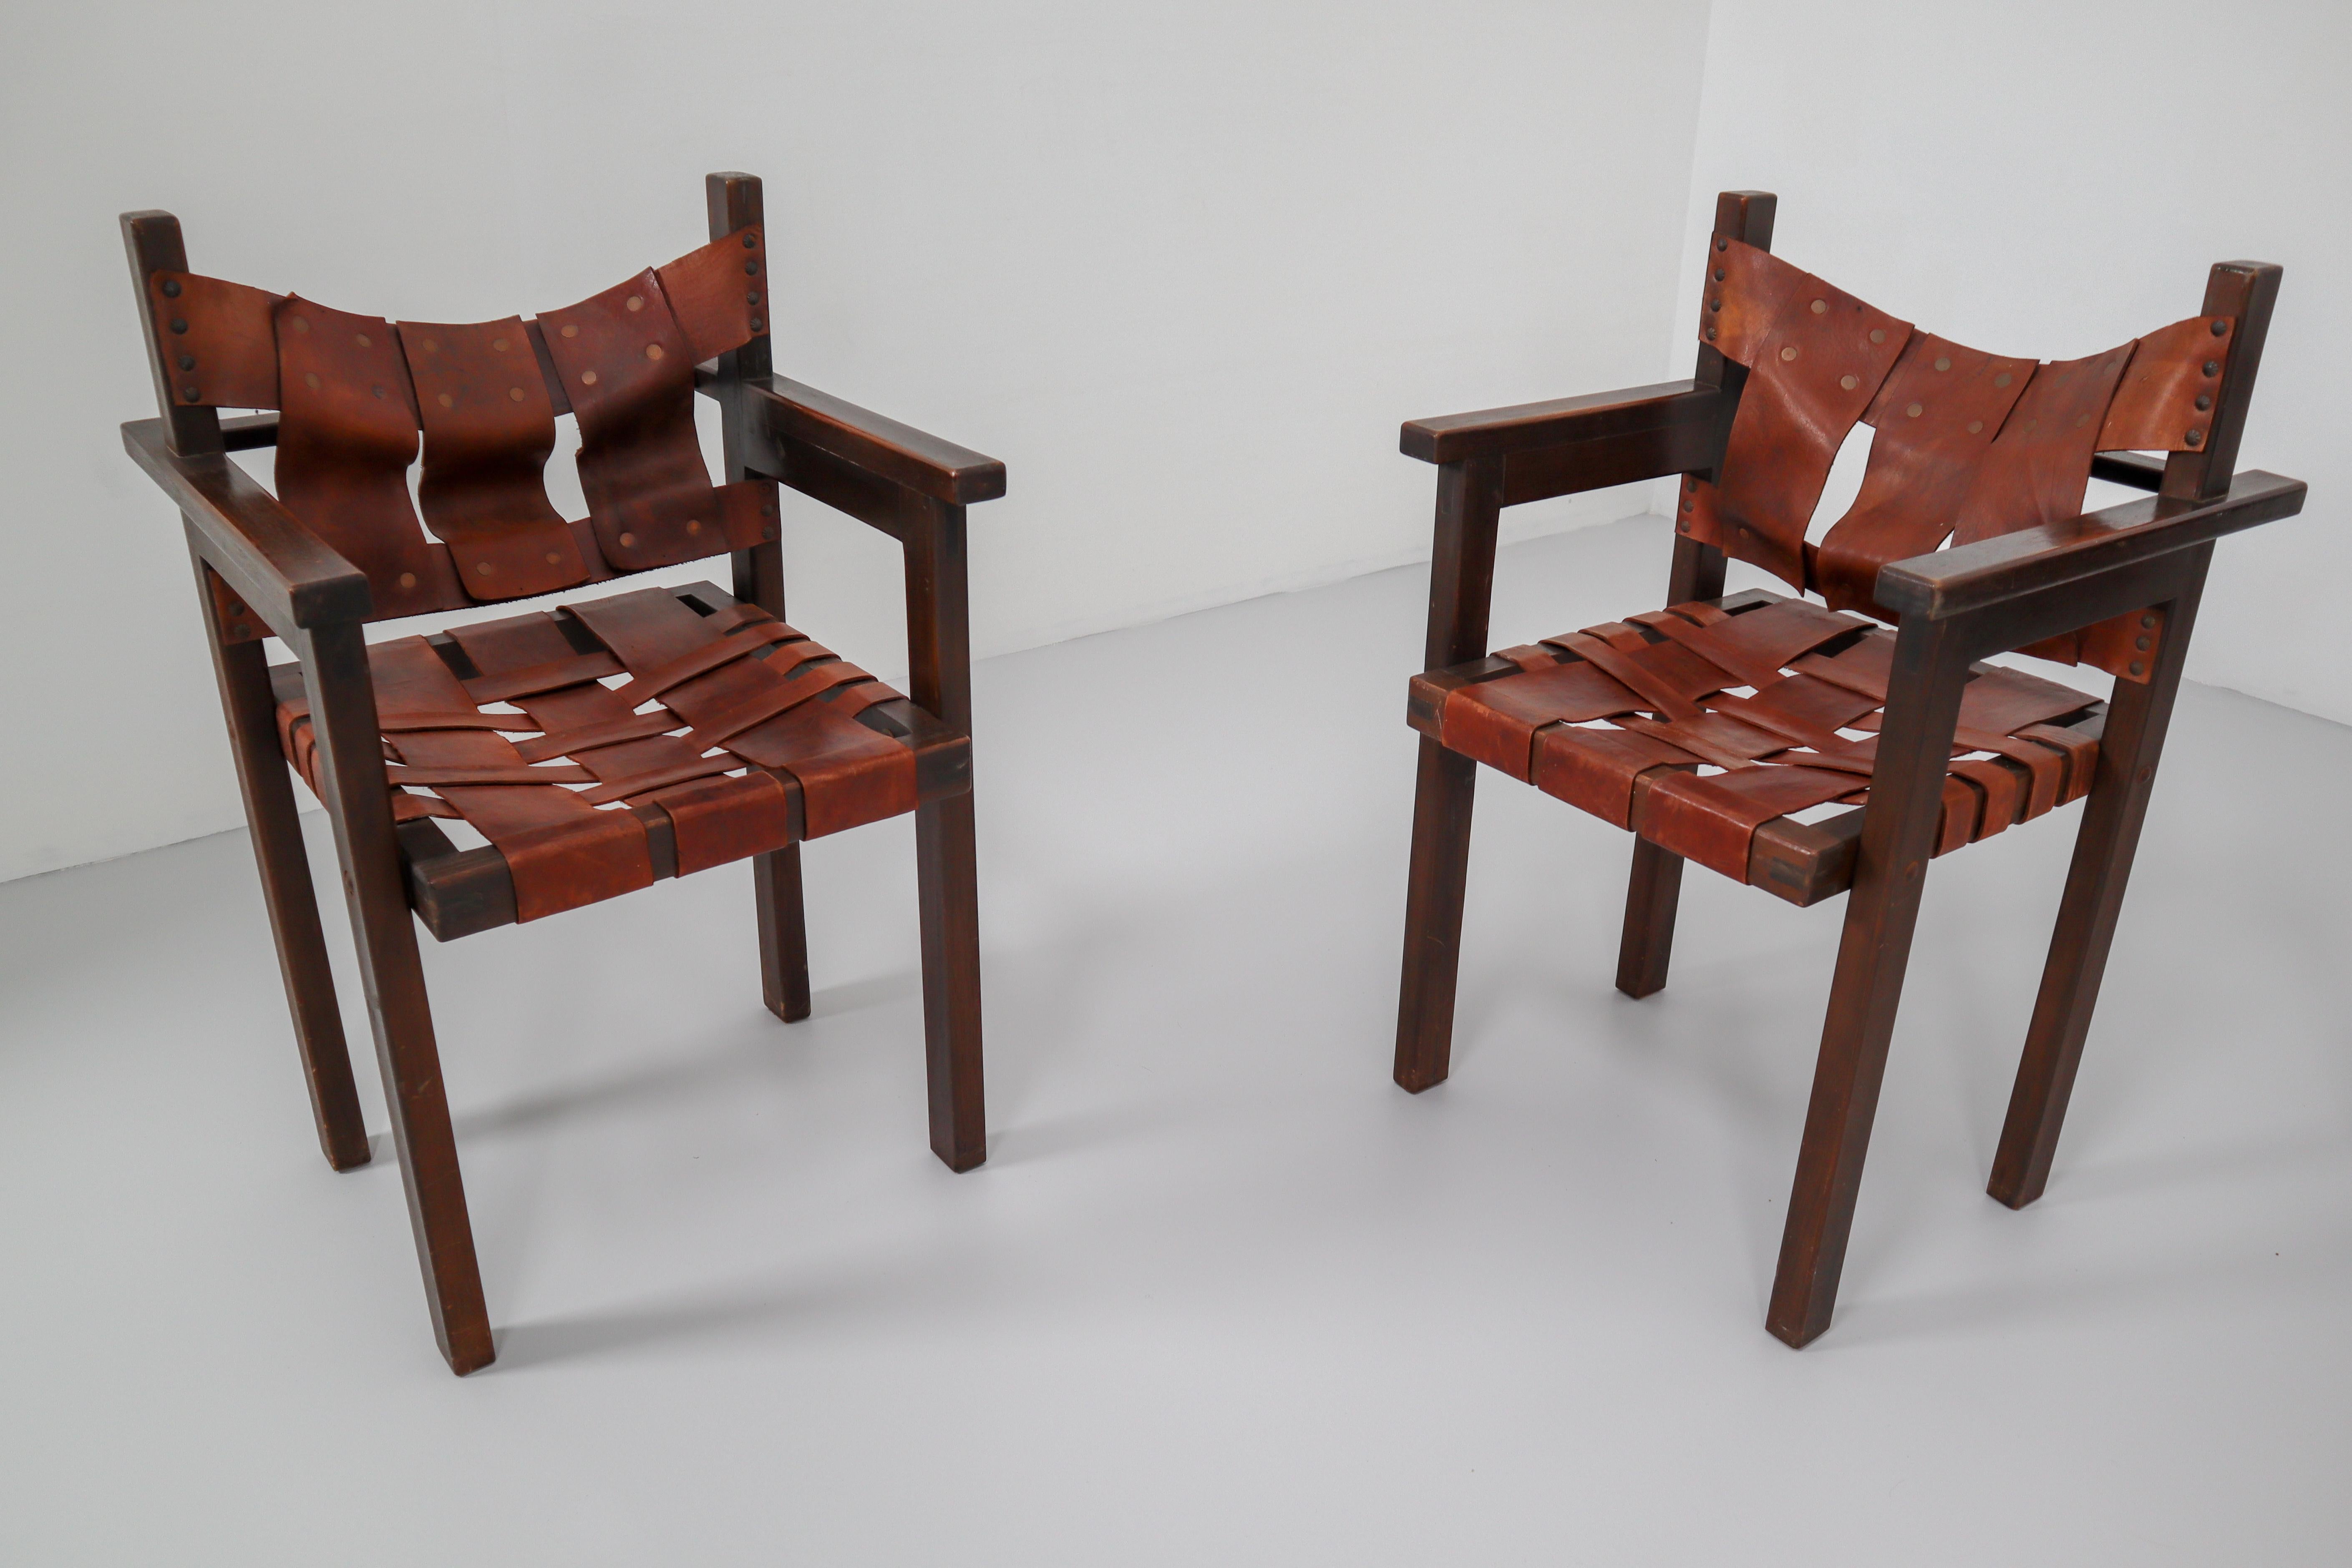 European Midcentury Safari Armchairs with Cognac Patinated Leather, 1960s